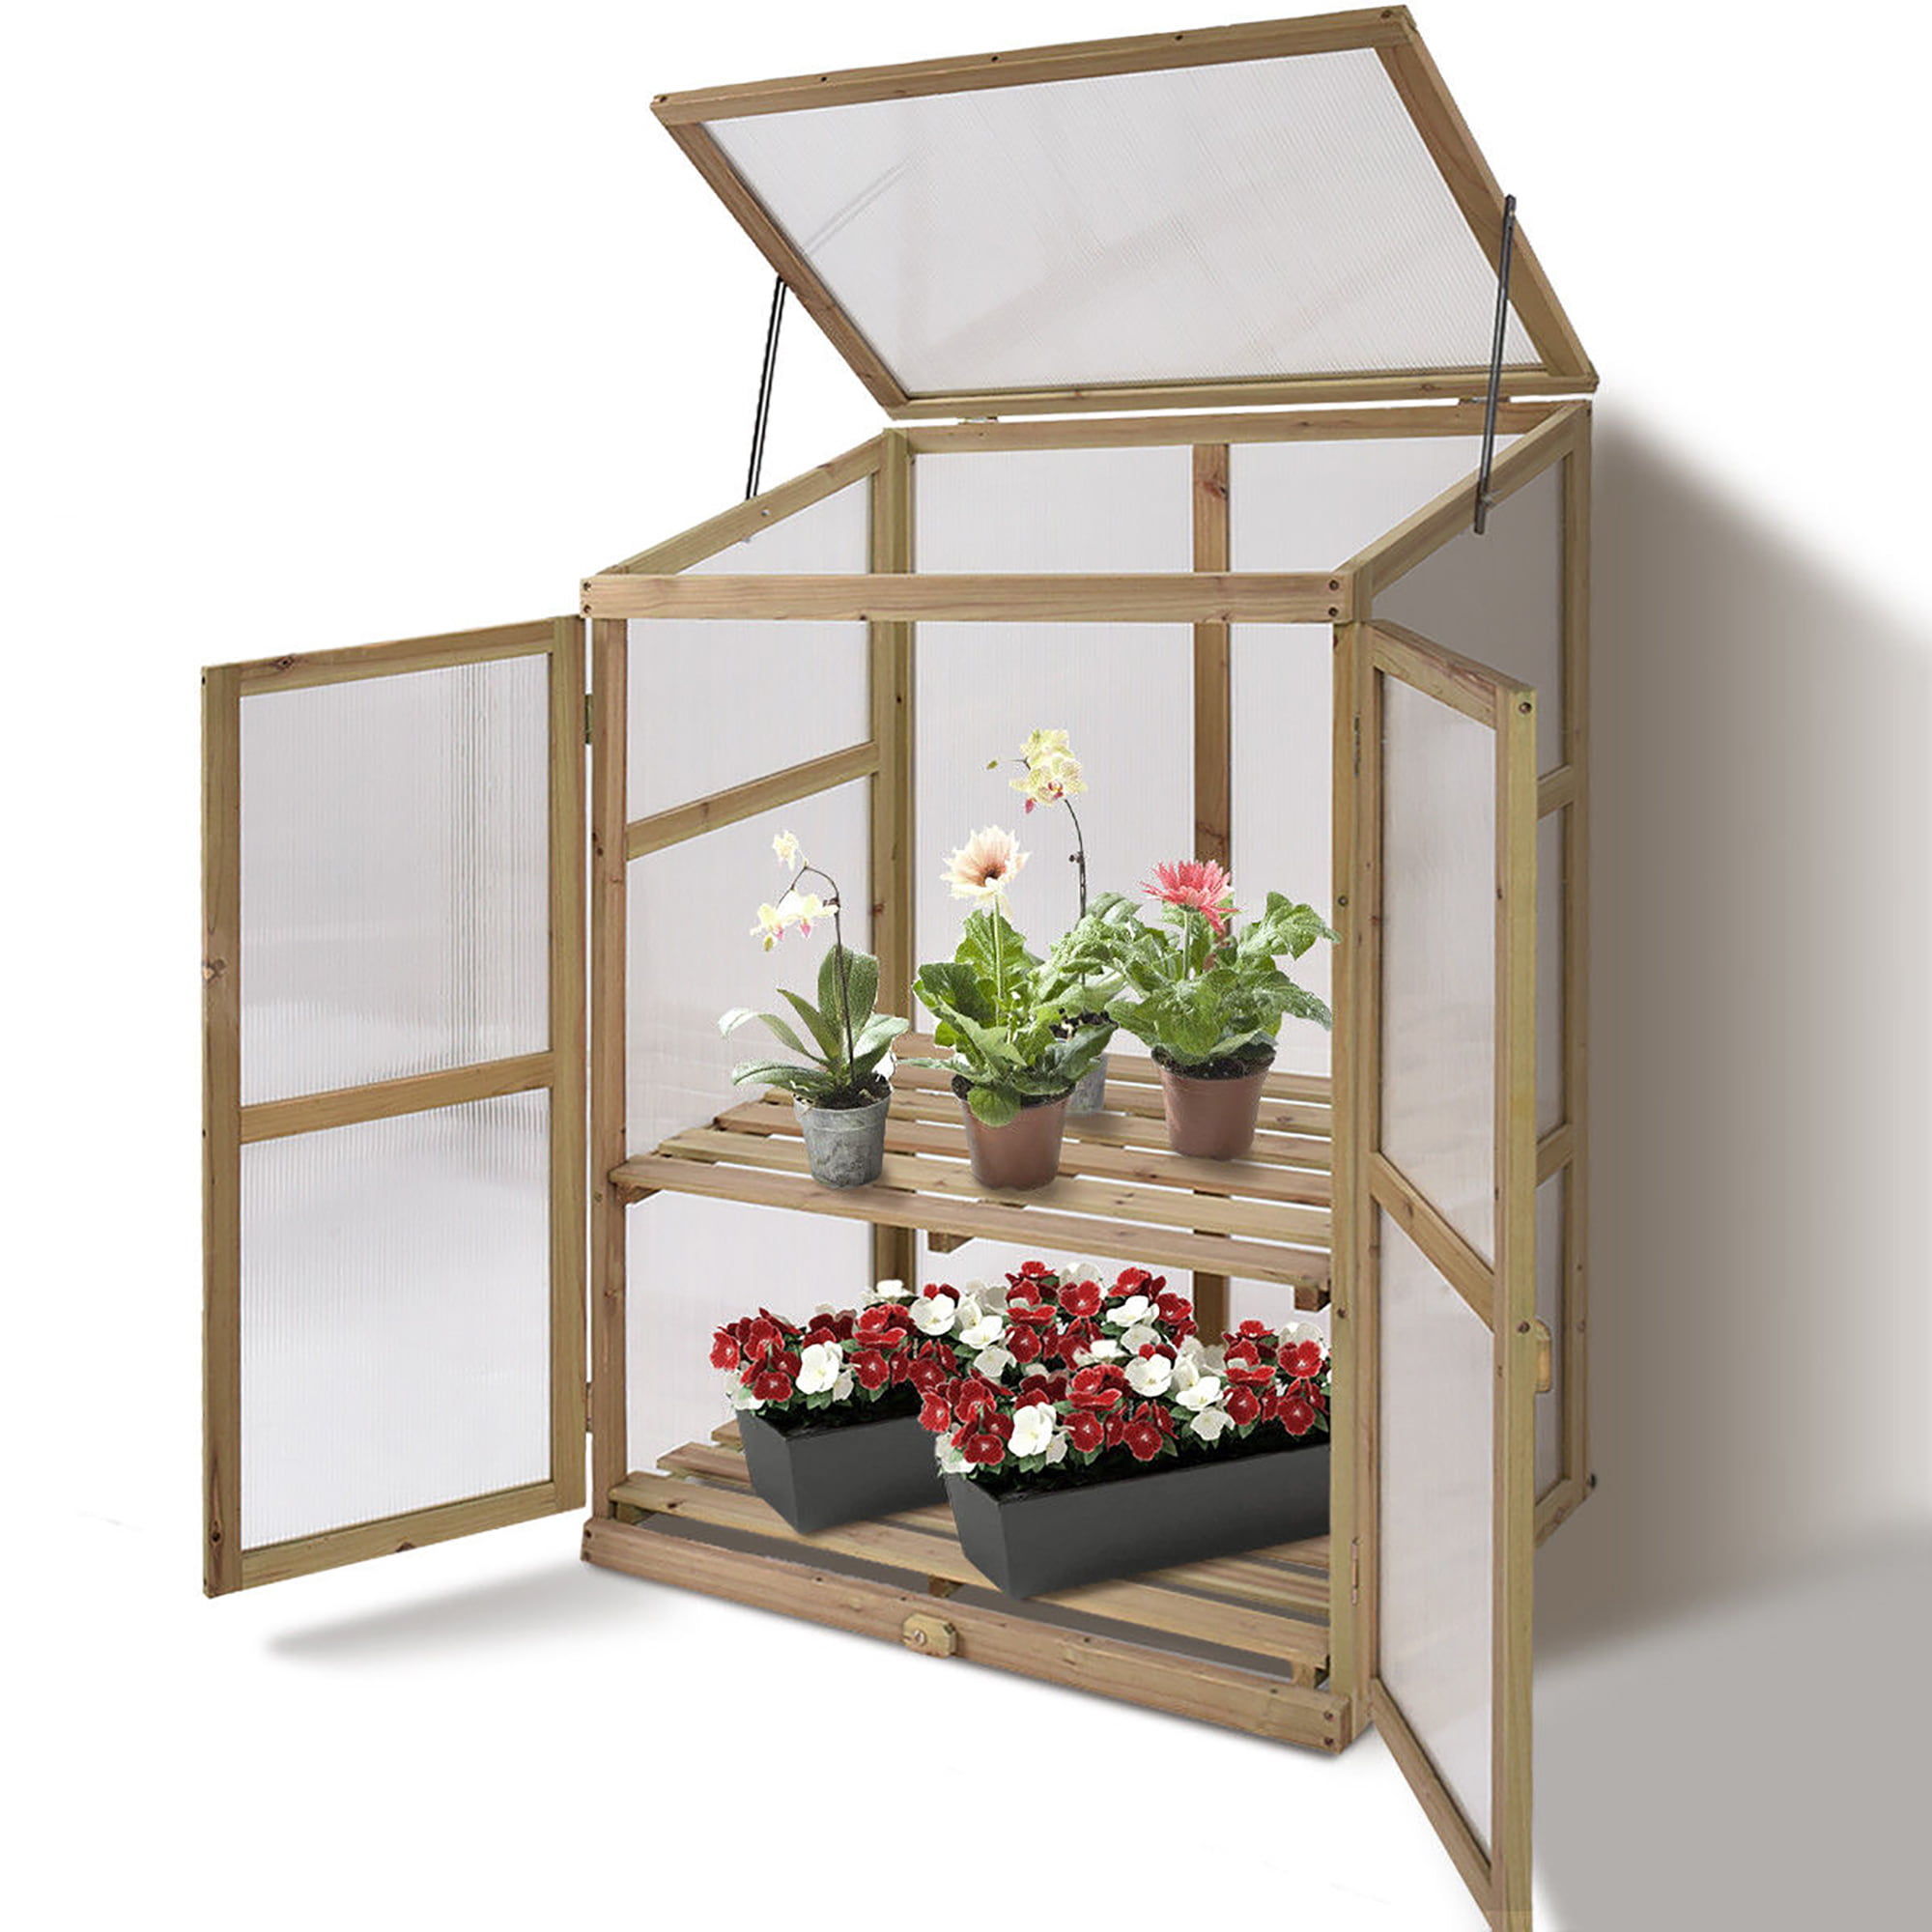 Transparent Grow House for Plant Flower Vegetable Outdoor Polycarbonate Greenhouse with 2 Independent Lids COSTWAY Wooden Cold Frame